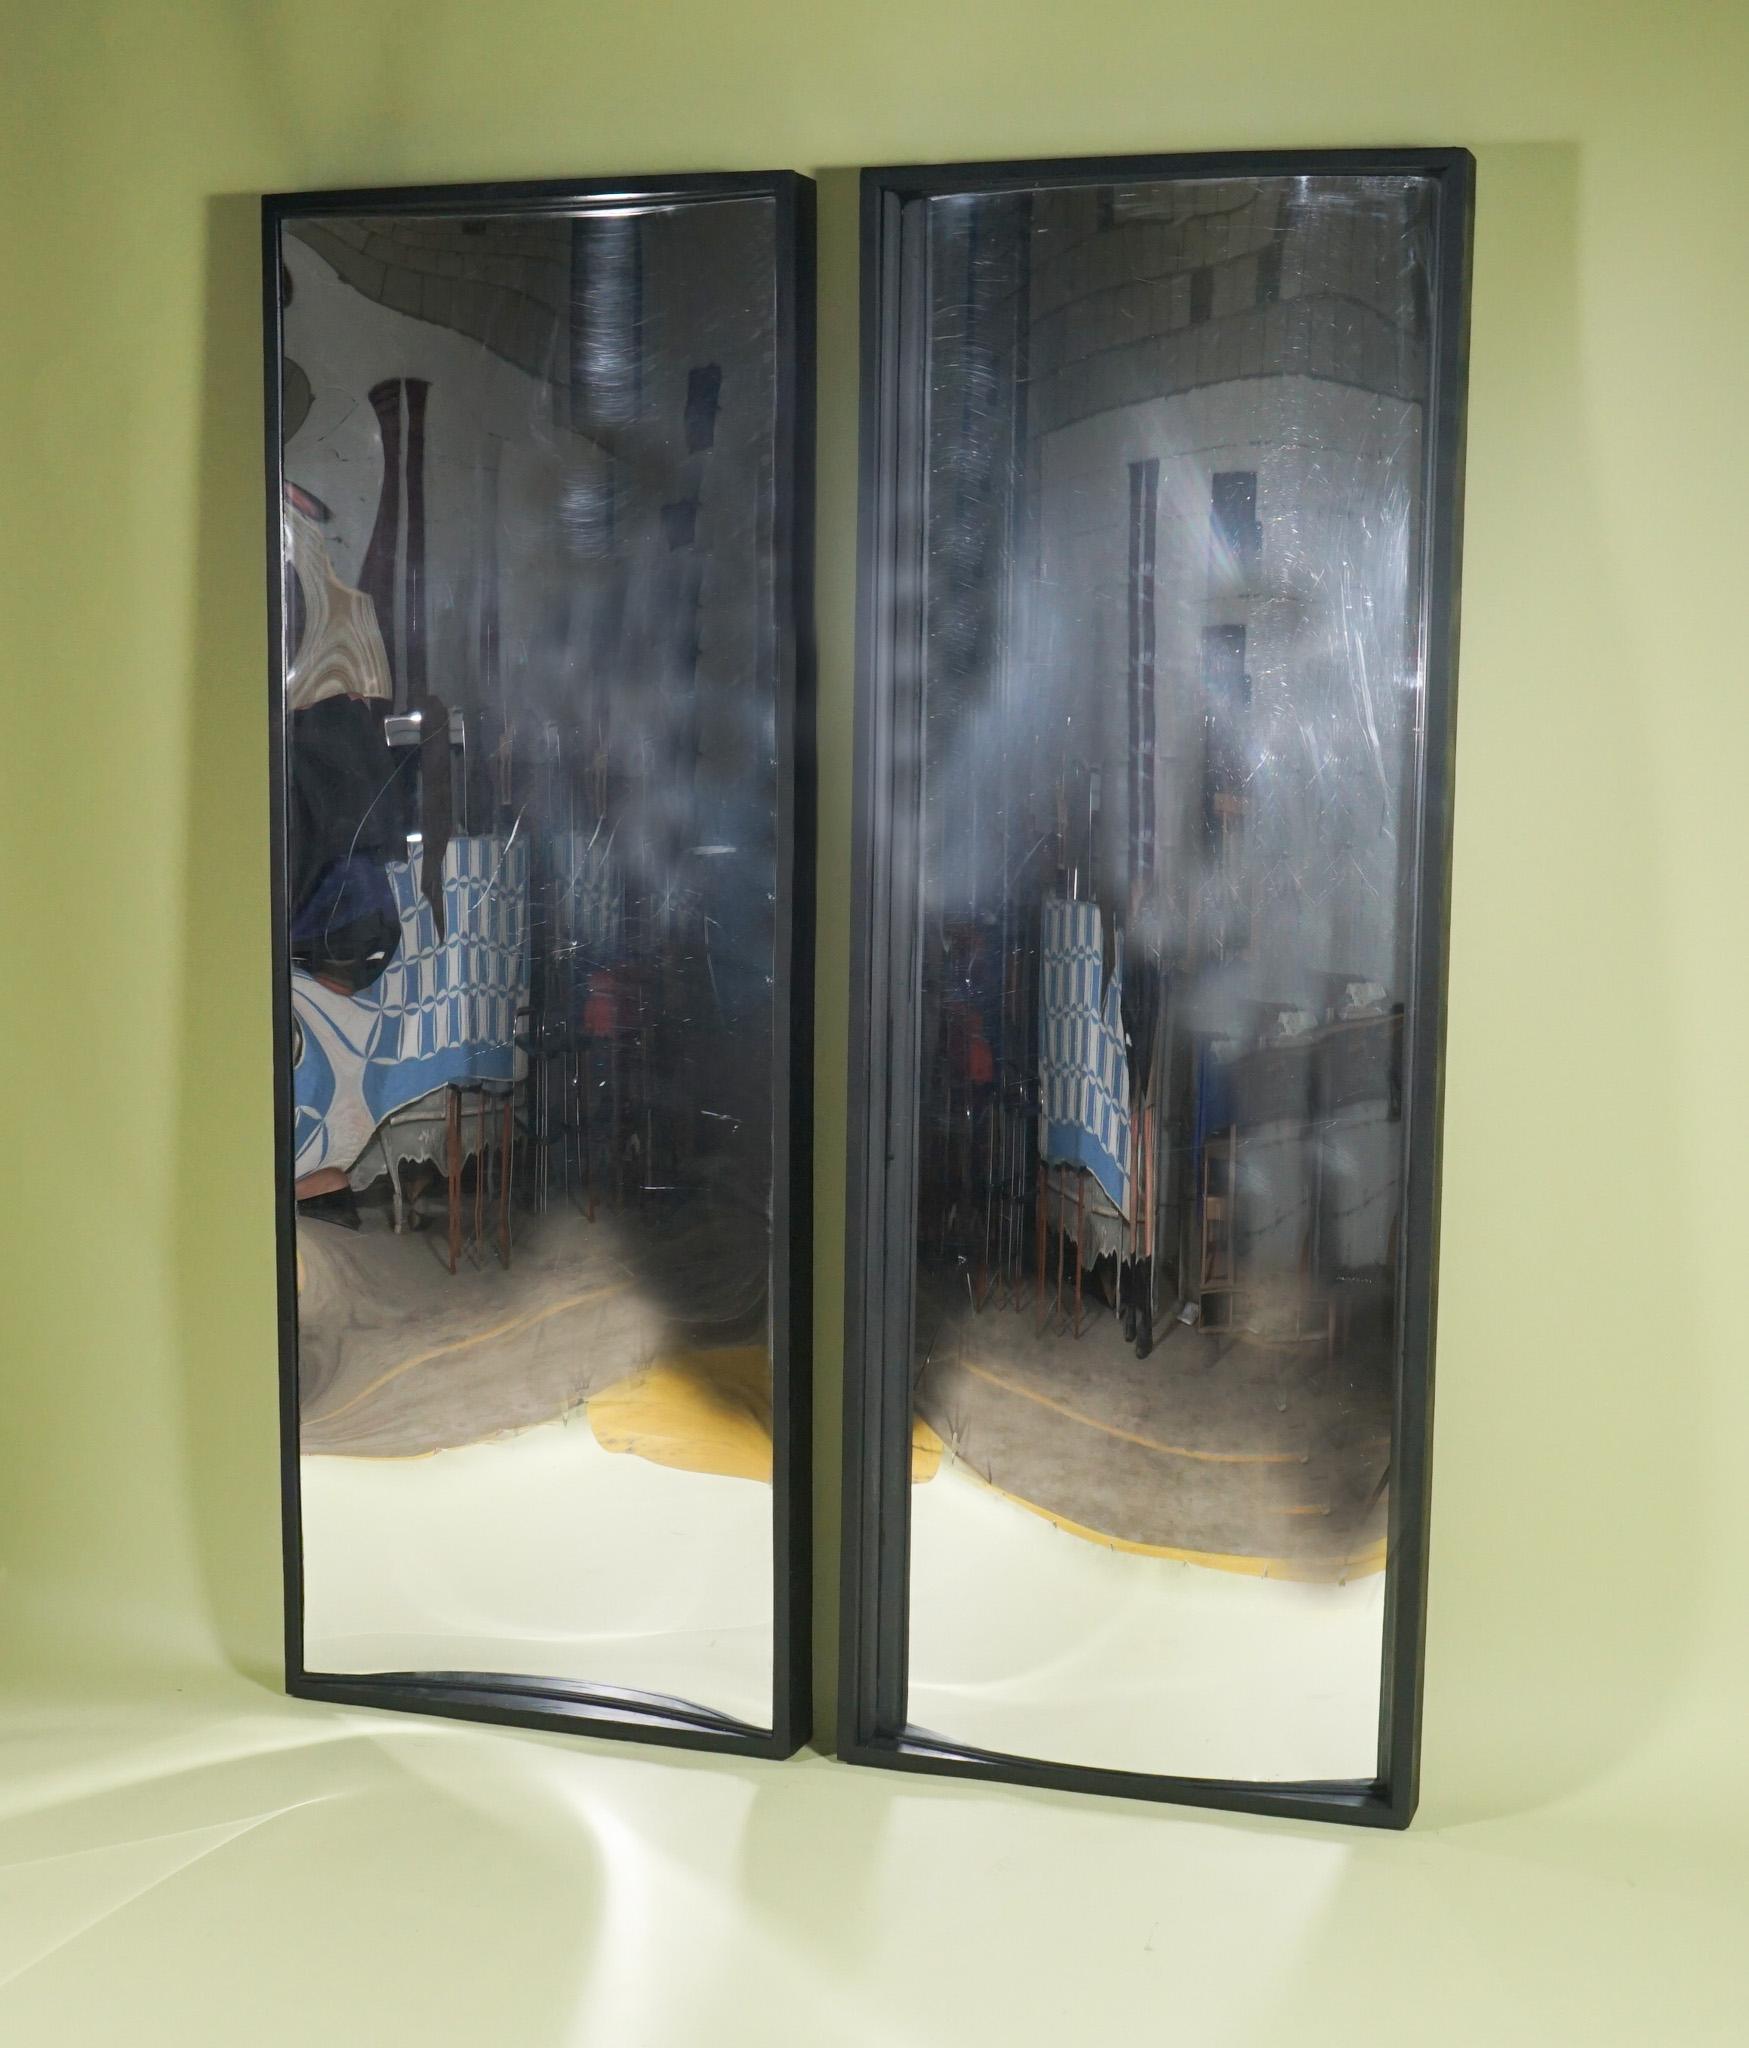 This large pair of fun house mirrors comes from the estate of famed designer Mario Buatta. He clearly had a love of these because a number of them in different sizes and shapes where featured among his personal property. Made in tempered acrylic and